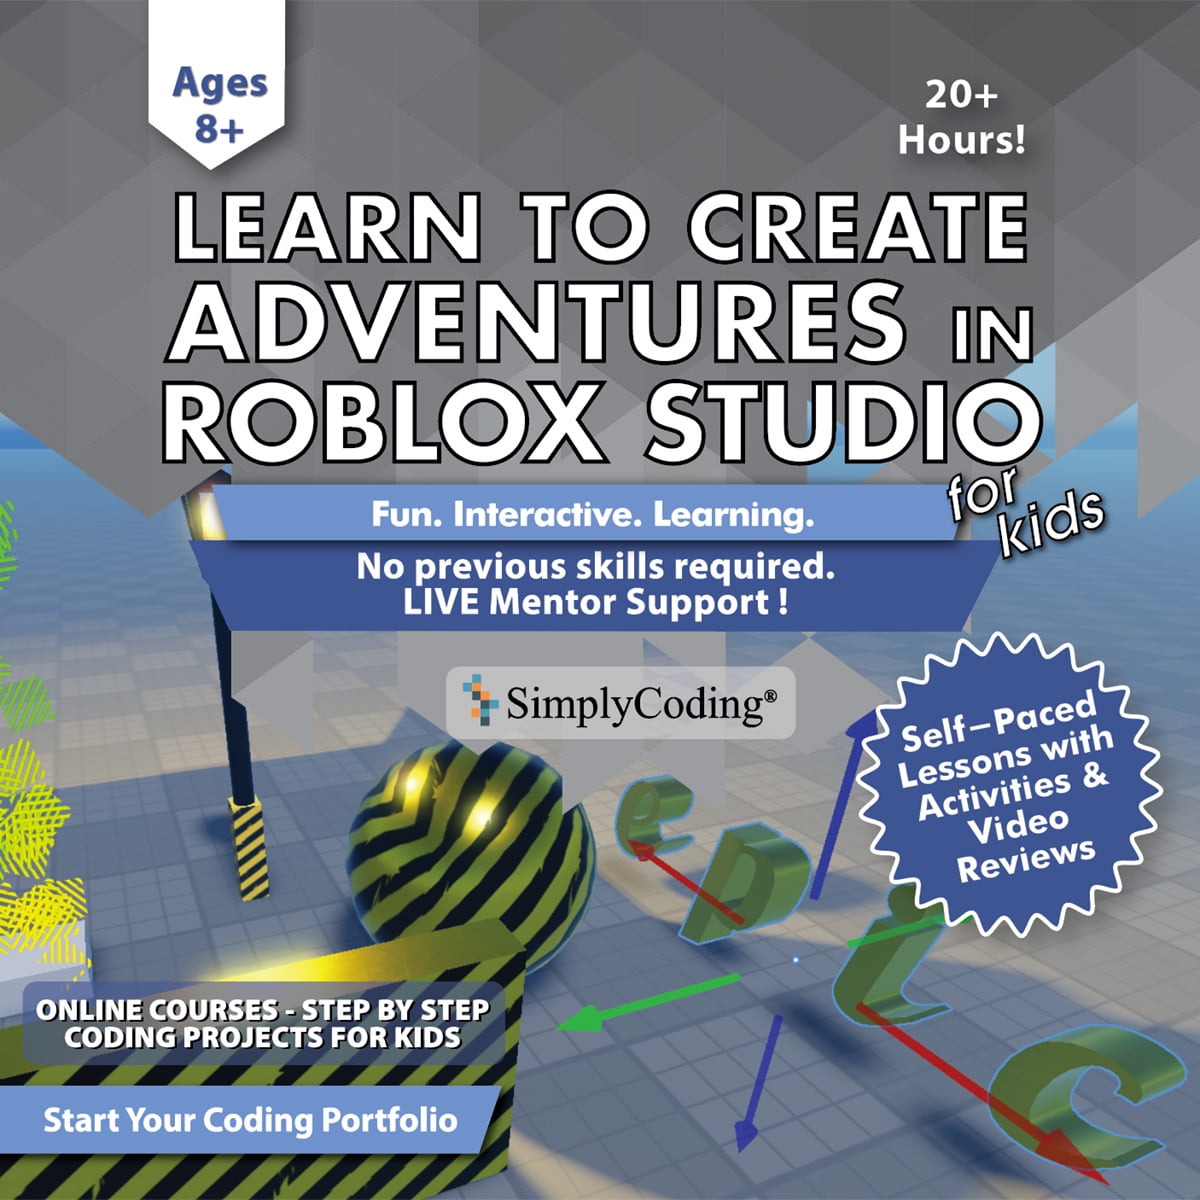 Learn to Code Roblox Worlds in Lua - Computer Programming for Beginners  Roblox Gift Card with Digital Pin Code, Ages 11-18, (PC, Mac, Chromebook  Compatible) 